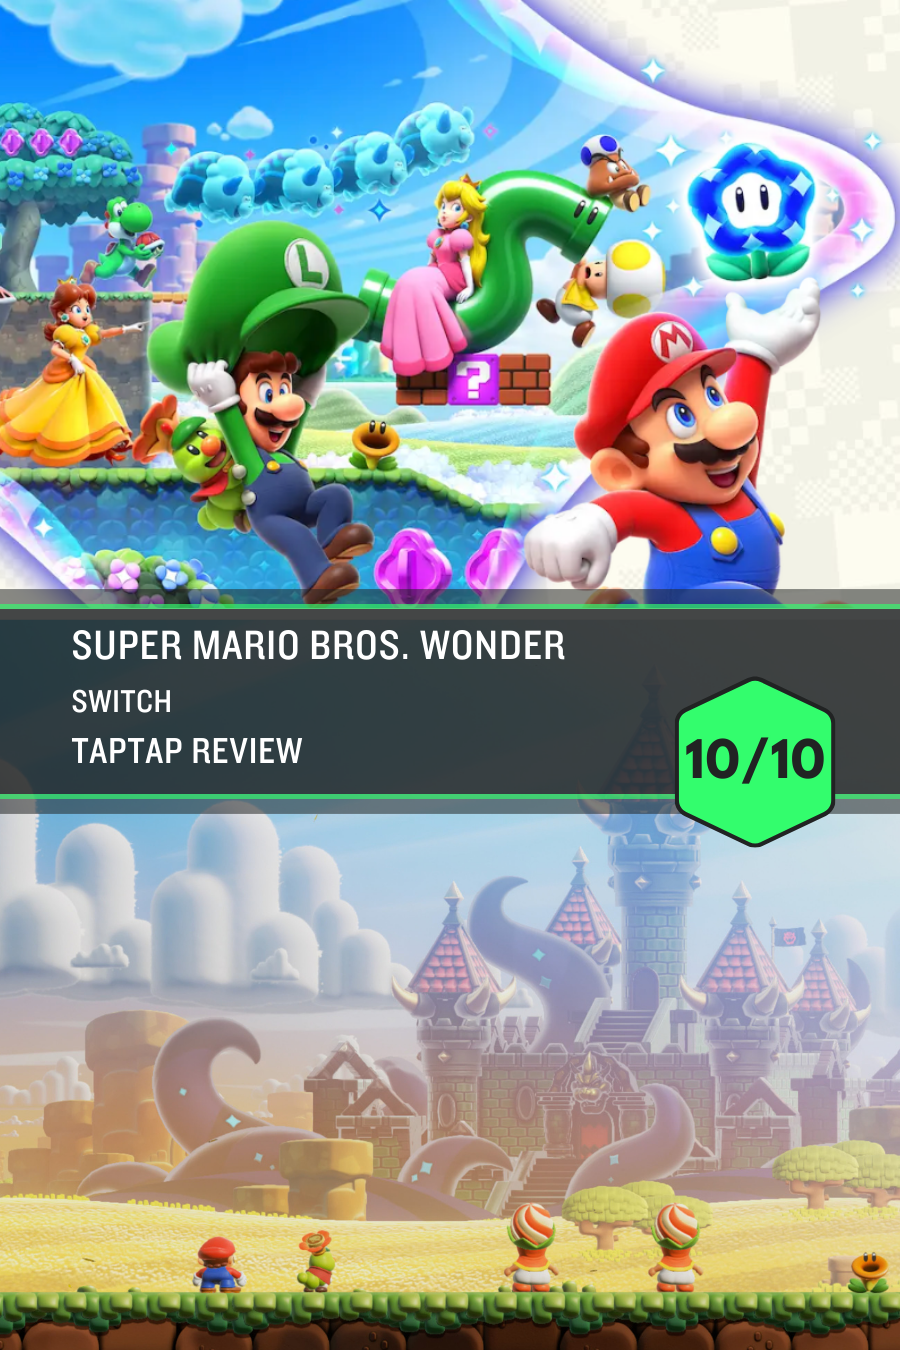 Nintendo's farewell masterpiece song for the Switch  Review - Super Mario  Bros. Wonder - Super Mario Bros.™ Wonder - Super Mario World (SNES, GBA) -  TapTap